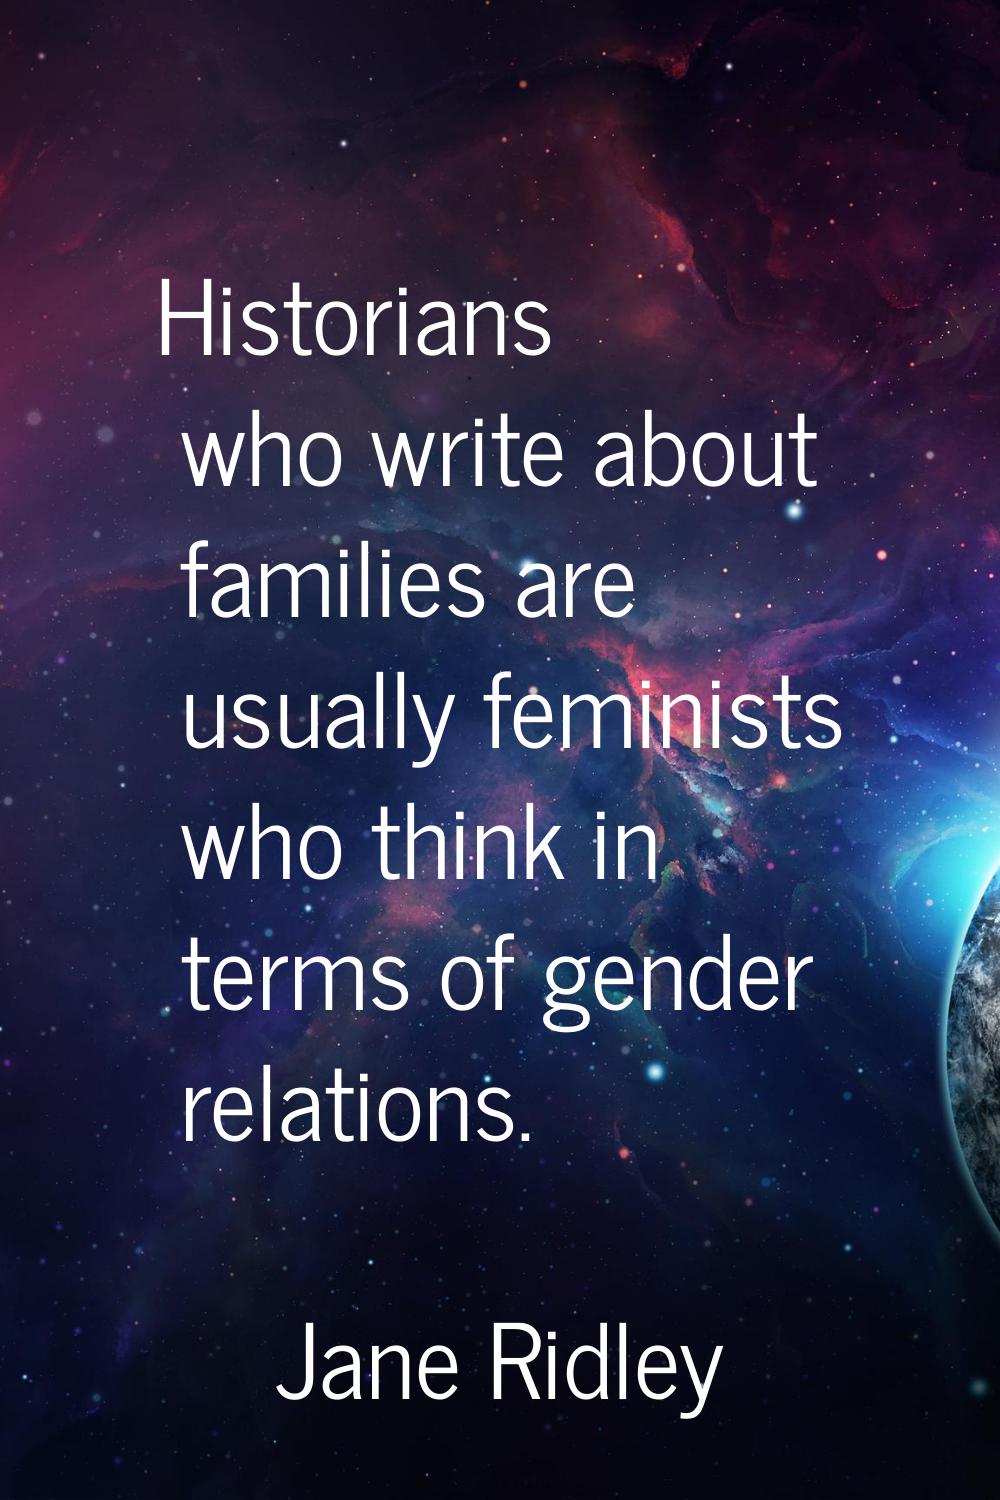 Historians who write about families are usually feminists who think in terms of gender relations.